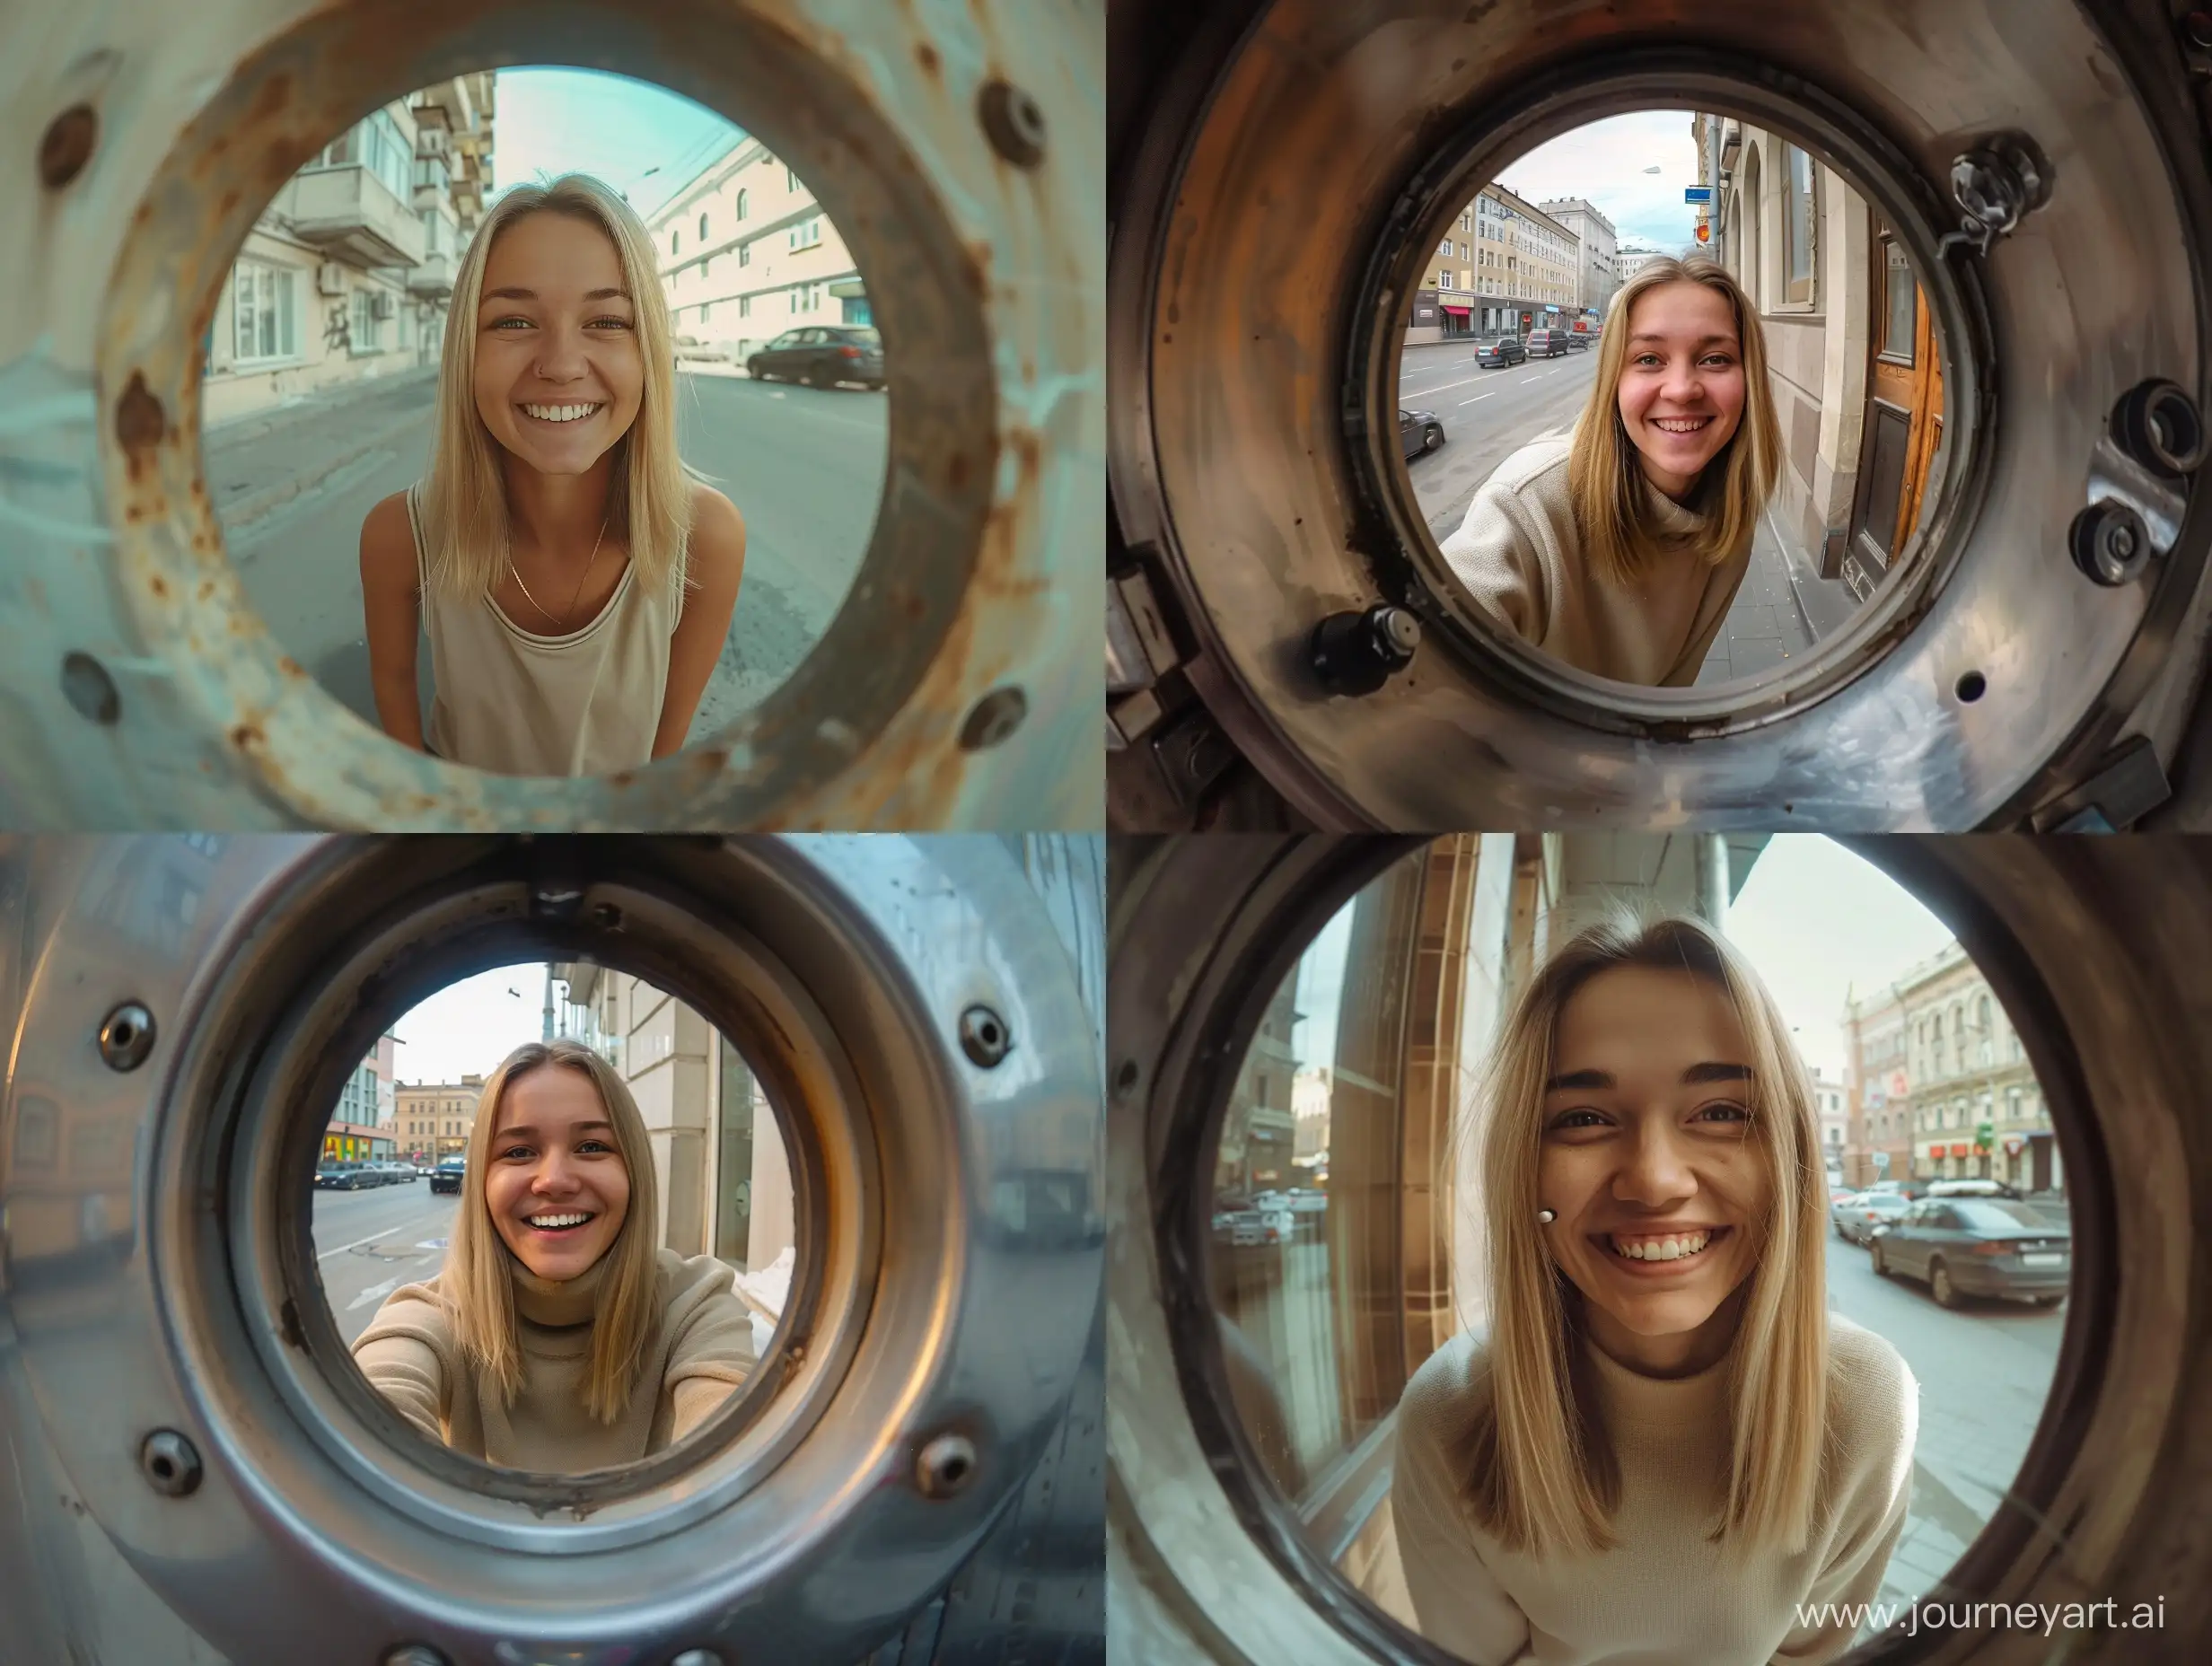 Magic eye short of Girl 30 years old, she is being seen through the peephole of a door, she smile, straight hair, below shoulder Length, blonde beige color, moscow city street background, take with gopro hero9 black camera with gopro super suit dive housing